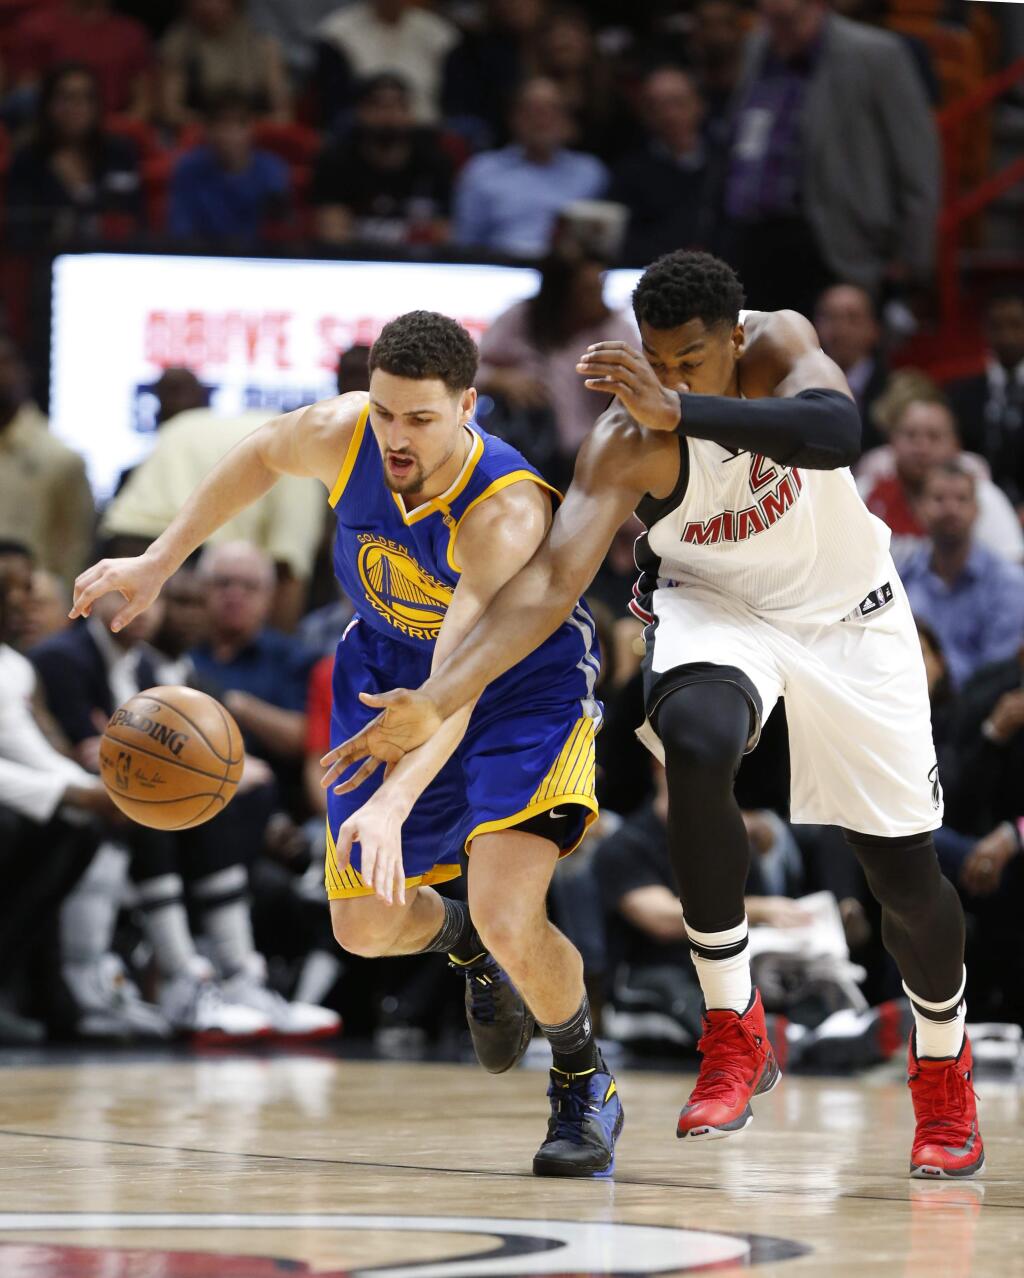 Golden State Warriors guard Klay Thompson, left, and Miami Heat center Hassan Whiteside (21) battle for a loose ball during the first half of an NBA basketball game, Monday, Jan. 23, 2017, in Miami. (AP Photo/Wilfredo Lee)